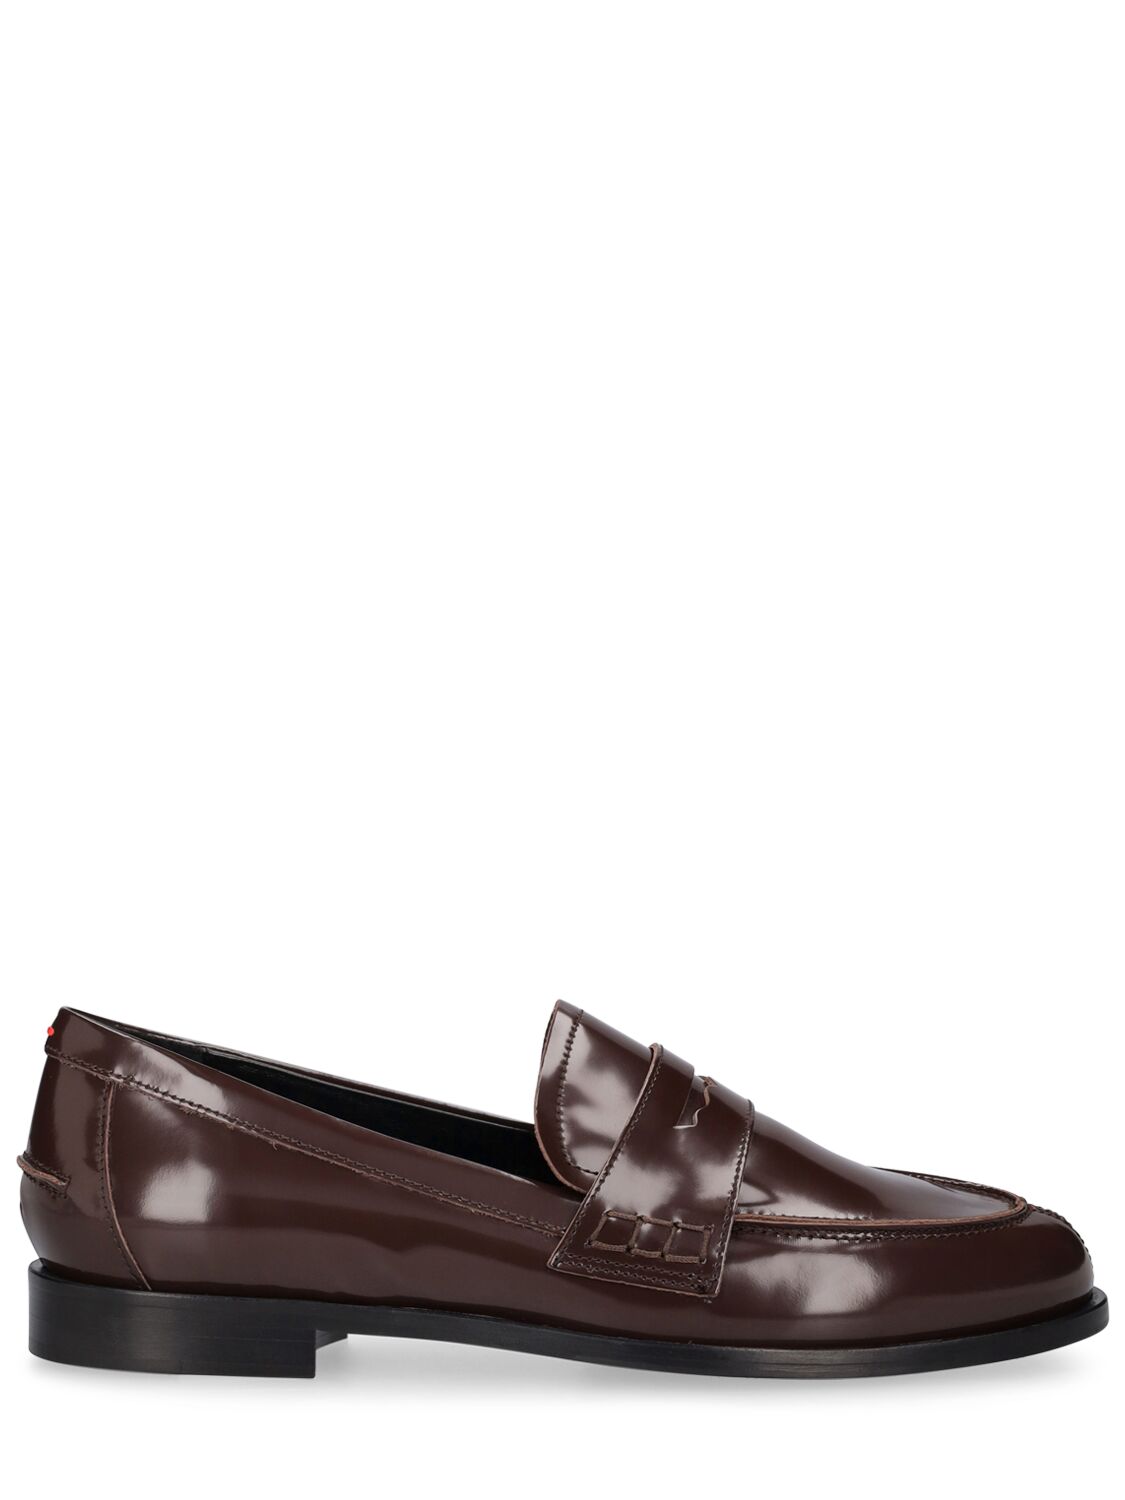 Image of 15mm Oscar Polido Leather Loafers